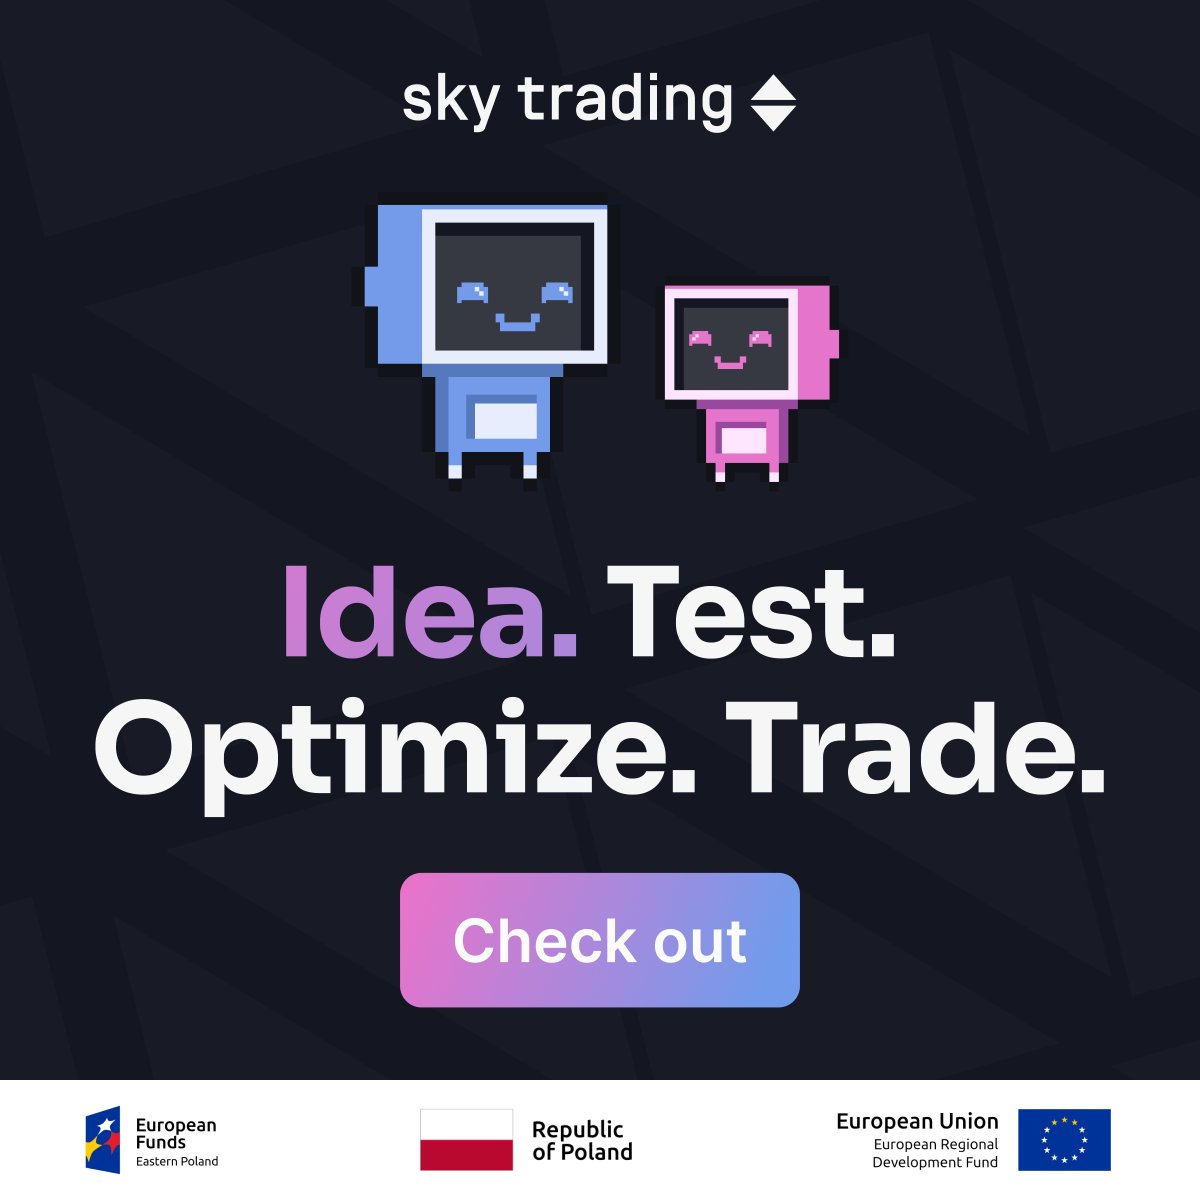 Project status: coming when it's ready 

Visit skytrading.io to see what we are changing for you.

#SkyTrading #TrailblazingInnovation #NextGenTrading #StayUpdated